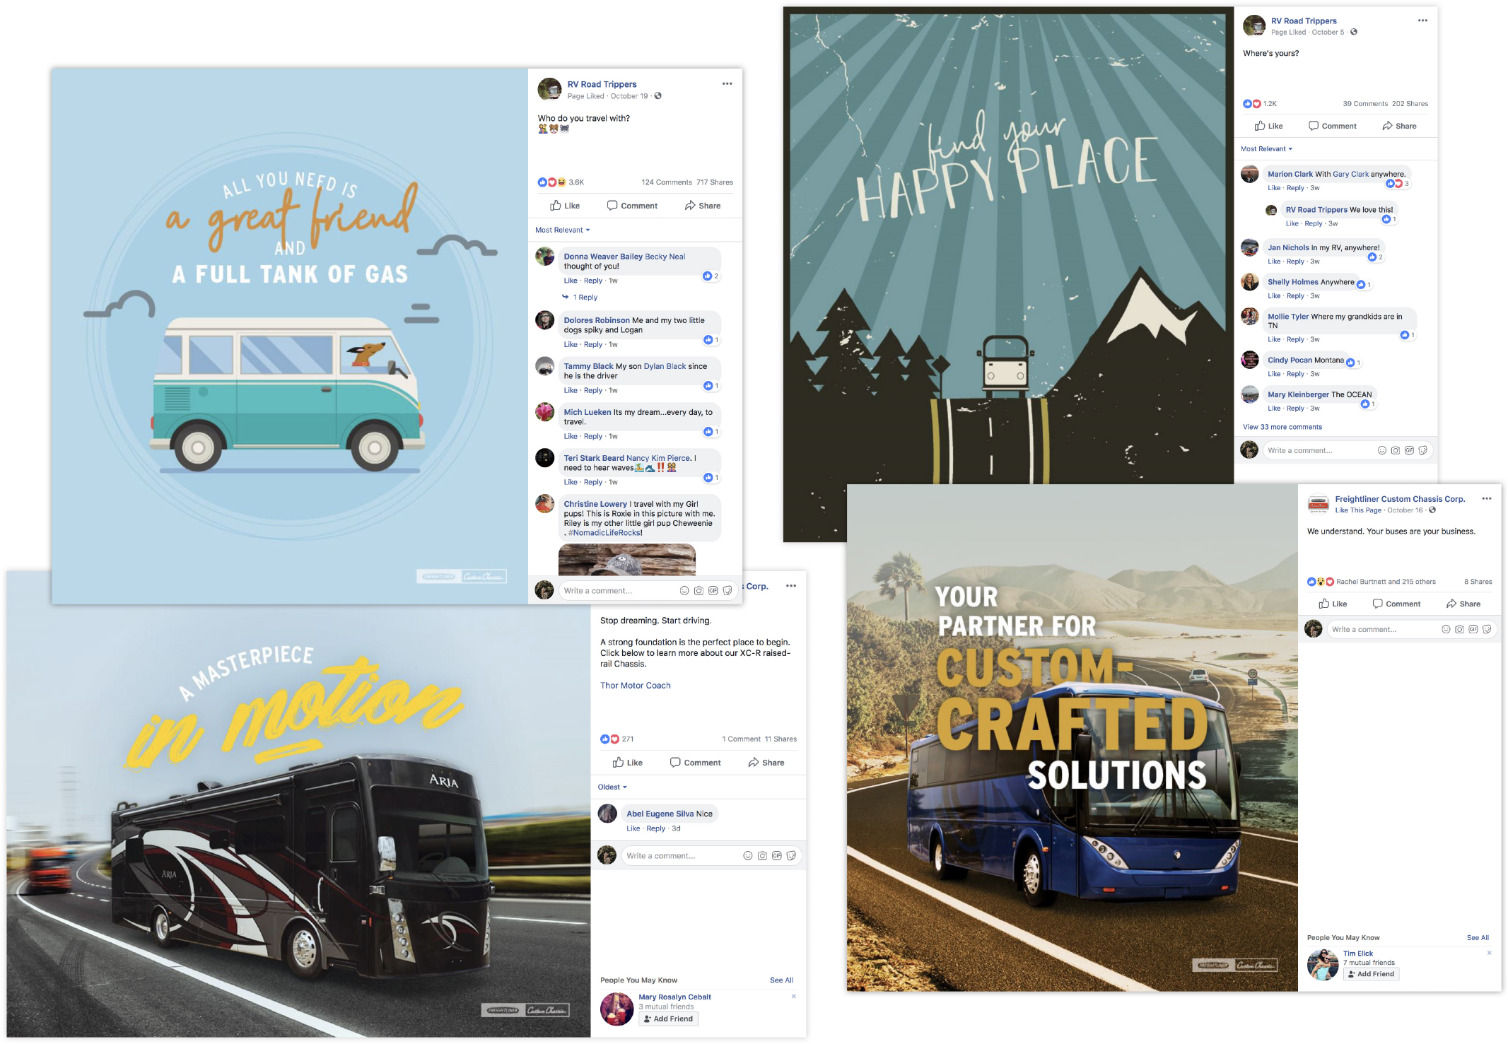 Freightliner Custom Chassis Social media campaign example collage